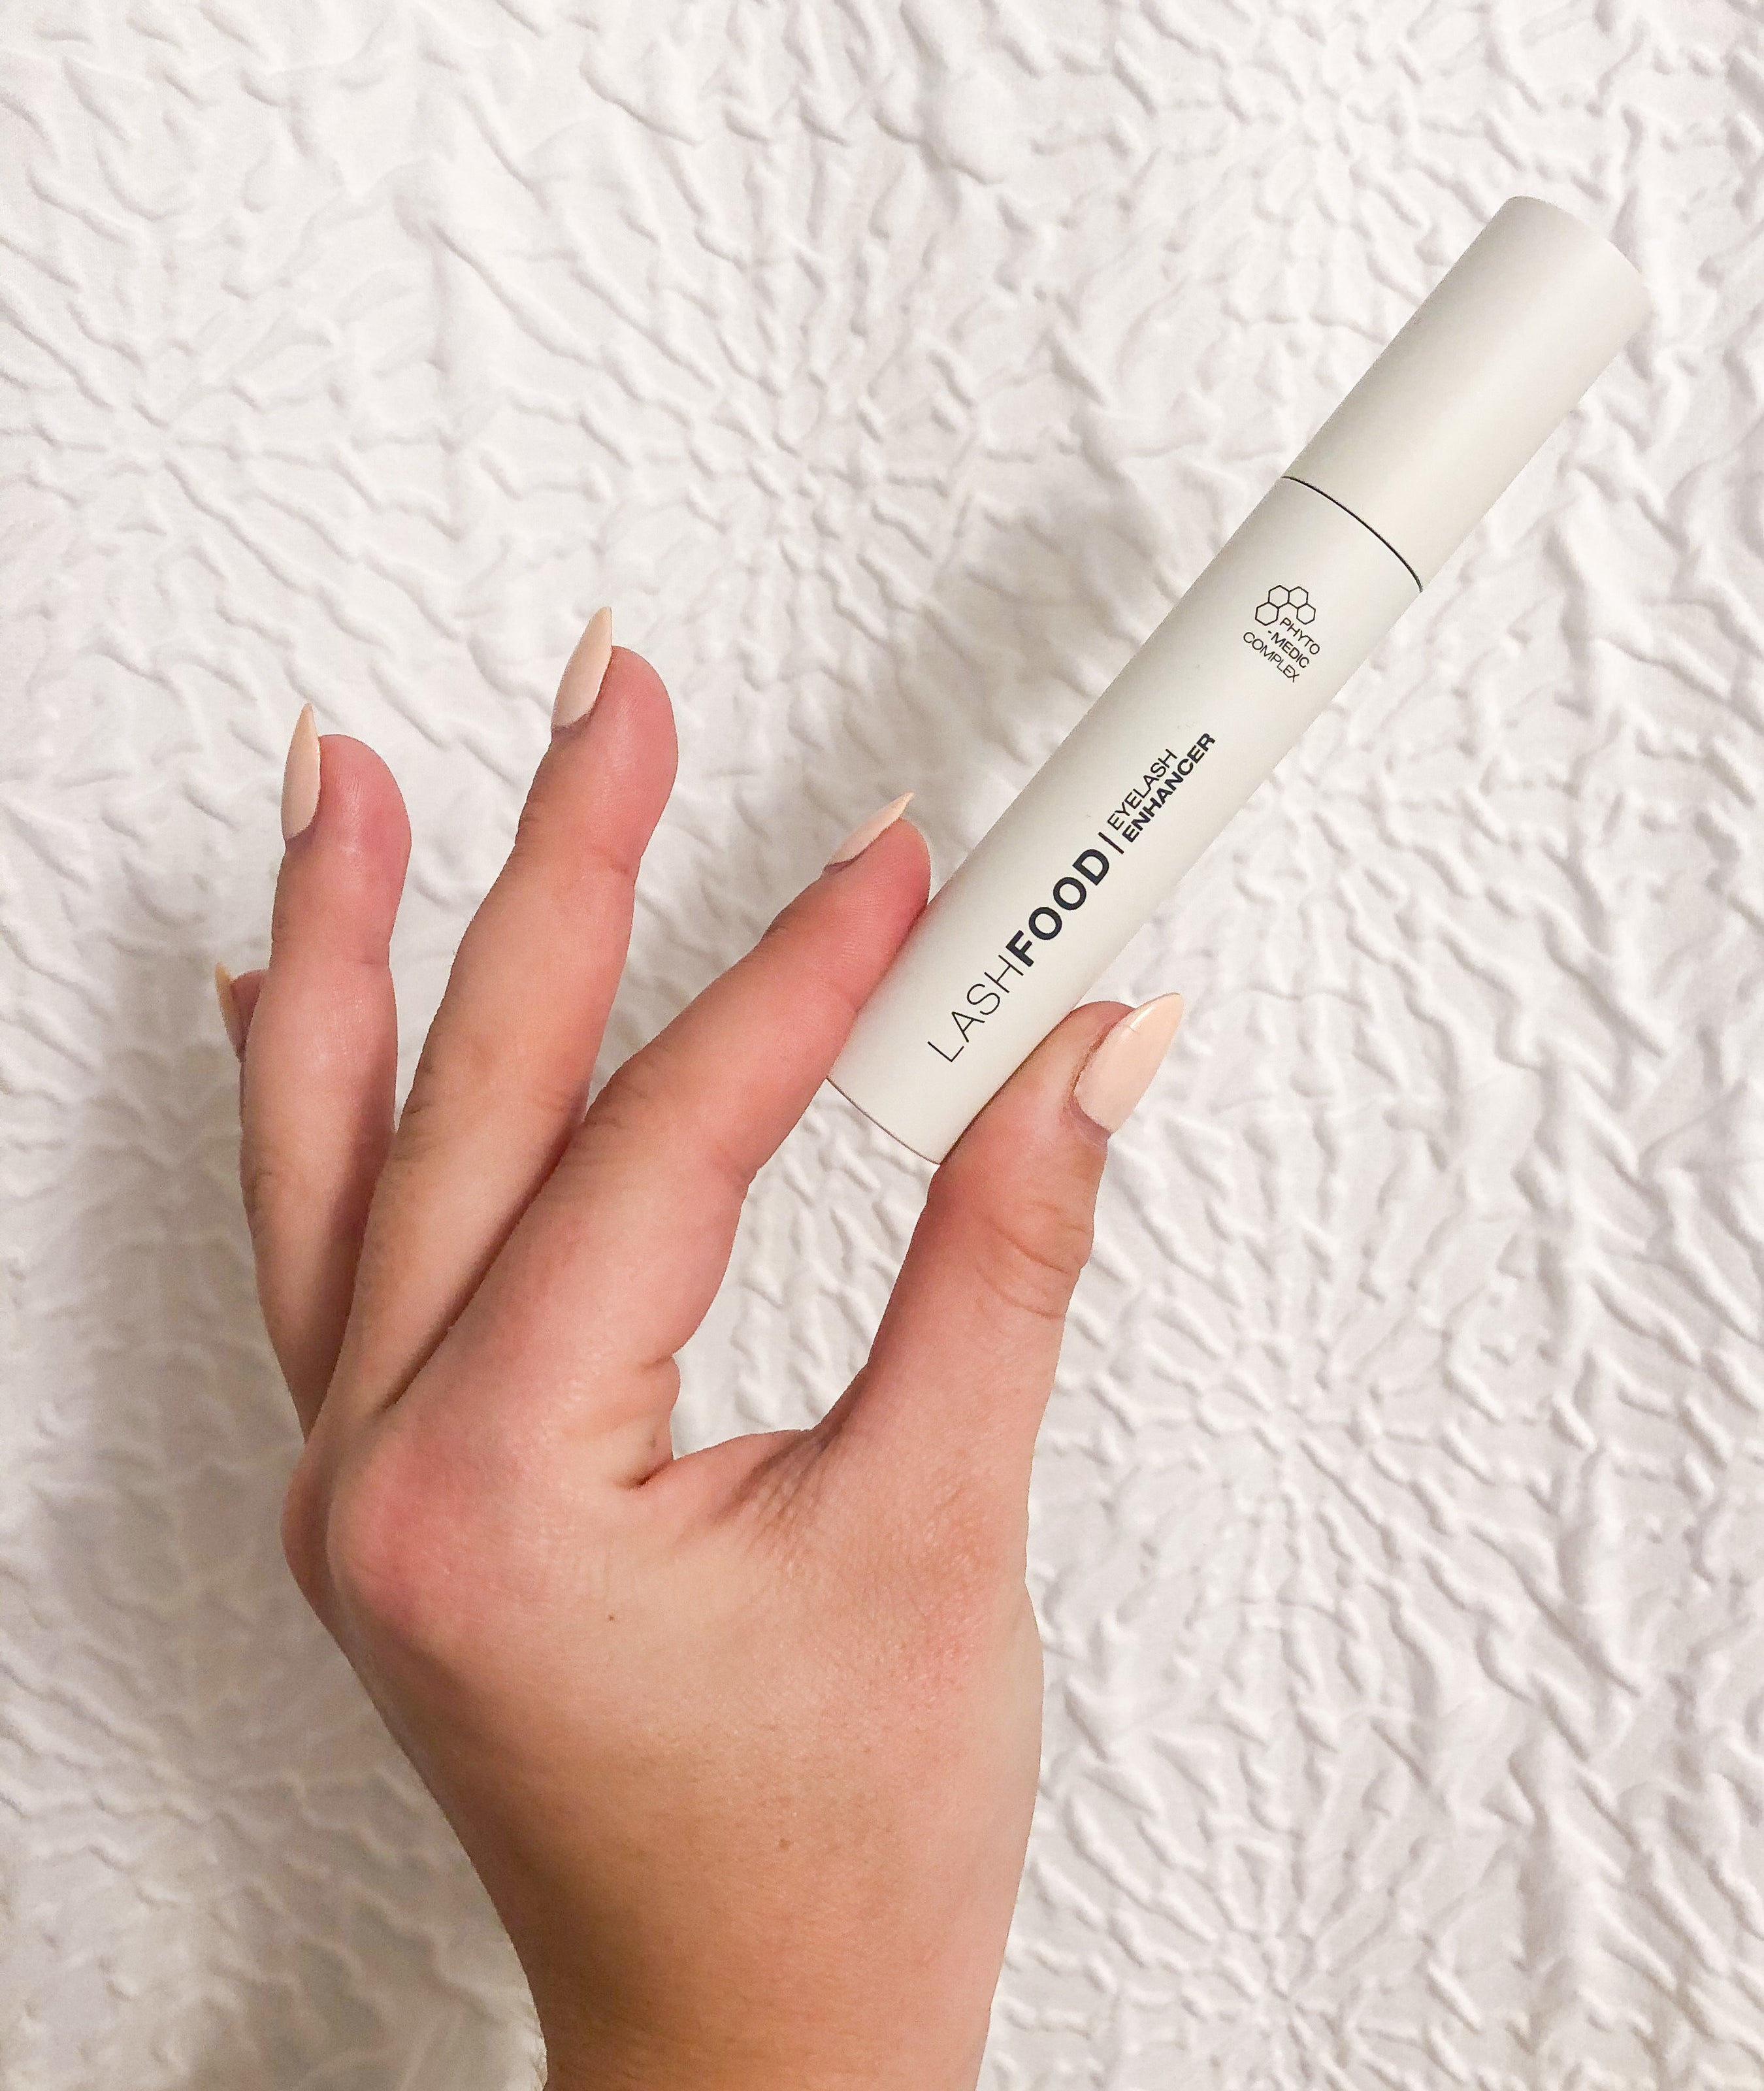 A person holds the lash conditioner between their fingers against a graphic backdrop